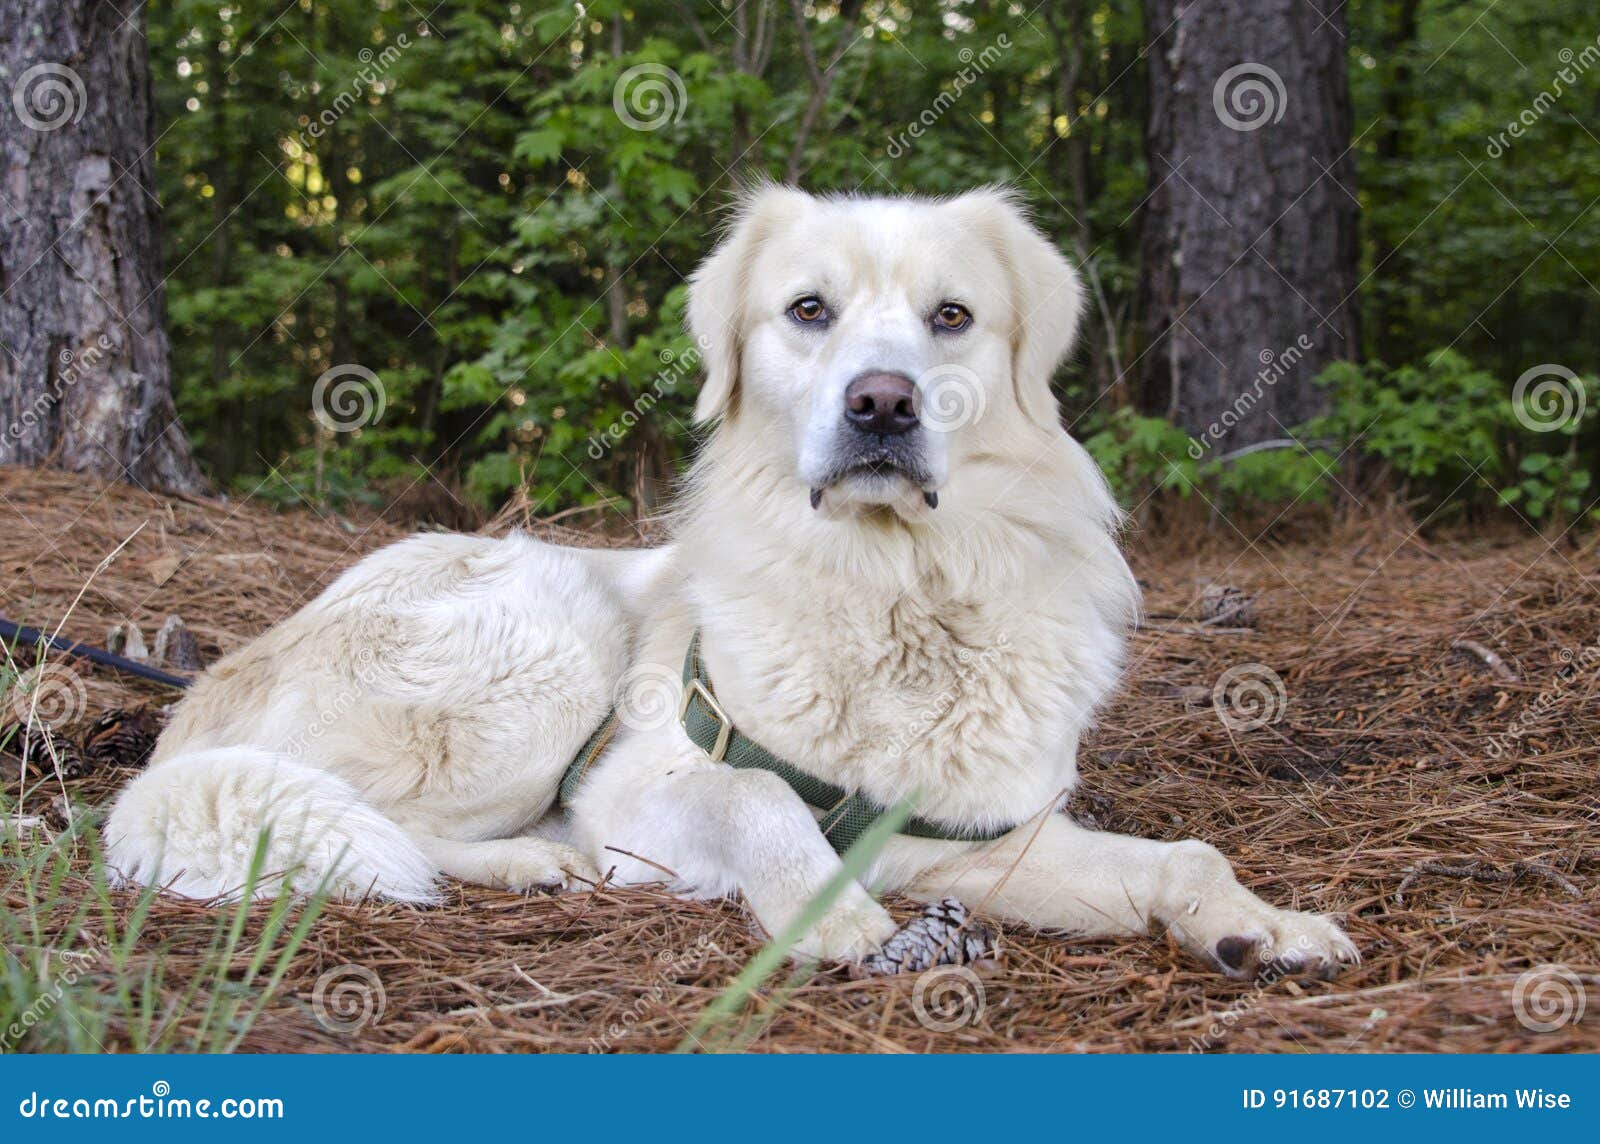 Golden Retriever Great Pyrenees Mixed Breed Dog Stock Photo Image Of Collie Animal 91687102